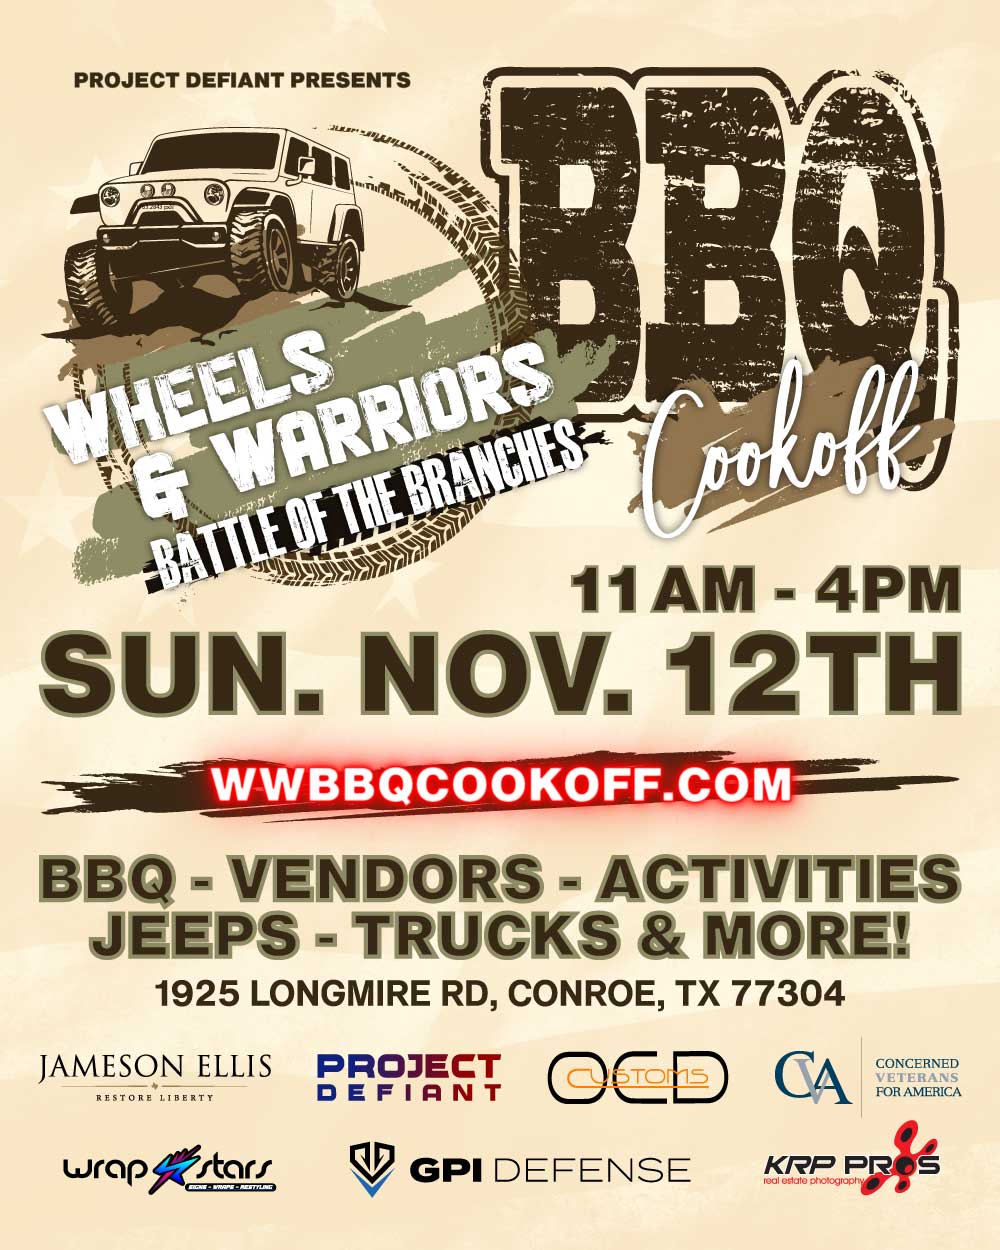 wheels & warriors battle of the branches bbq cookoff flyer